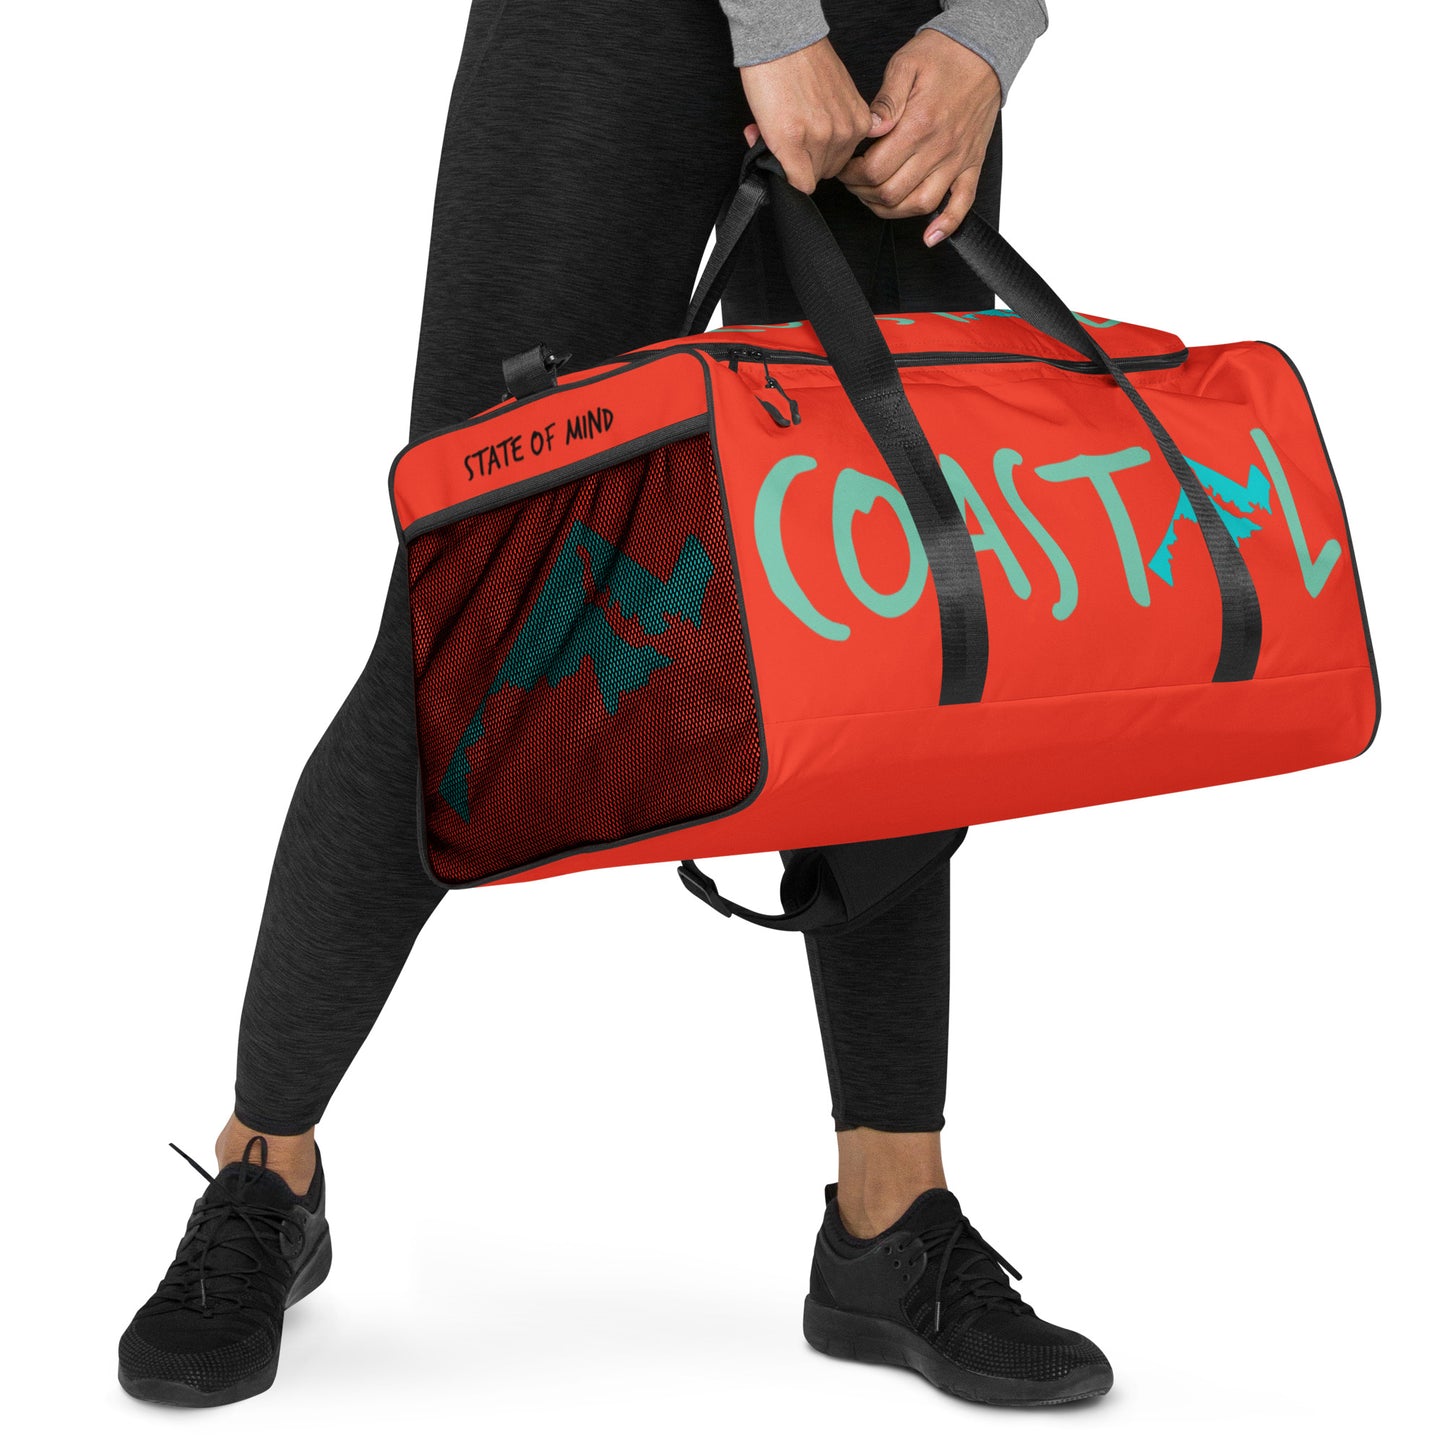 Coastal Maryland™ Carry Everything-in-Style Duffel